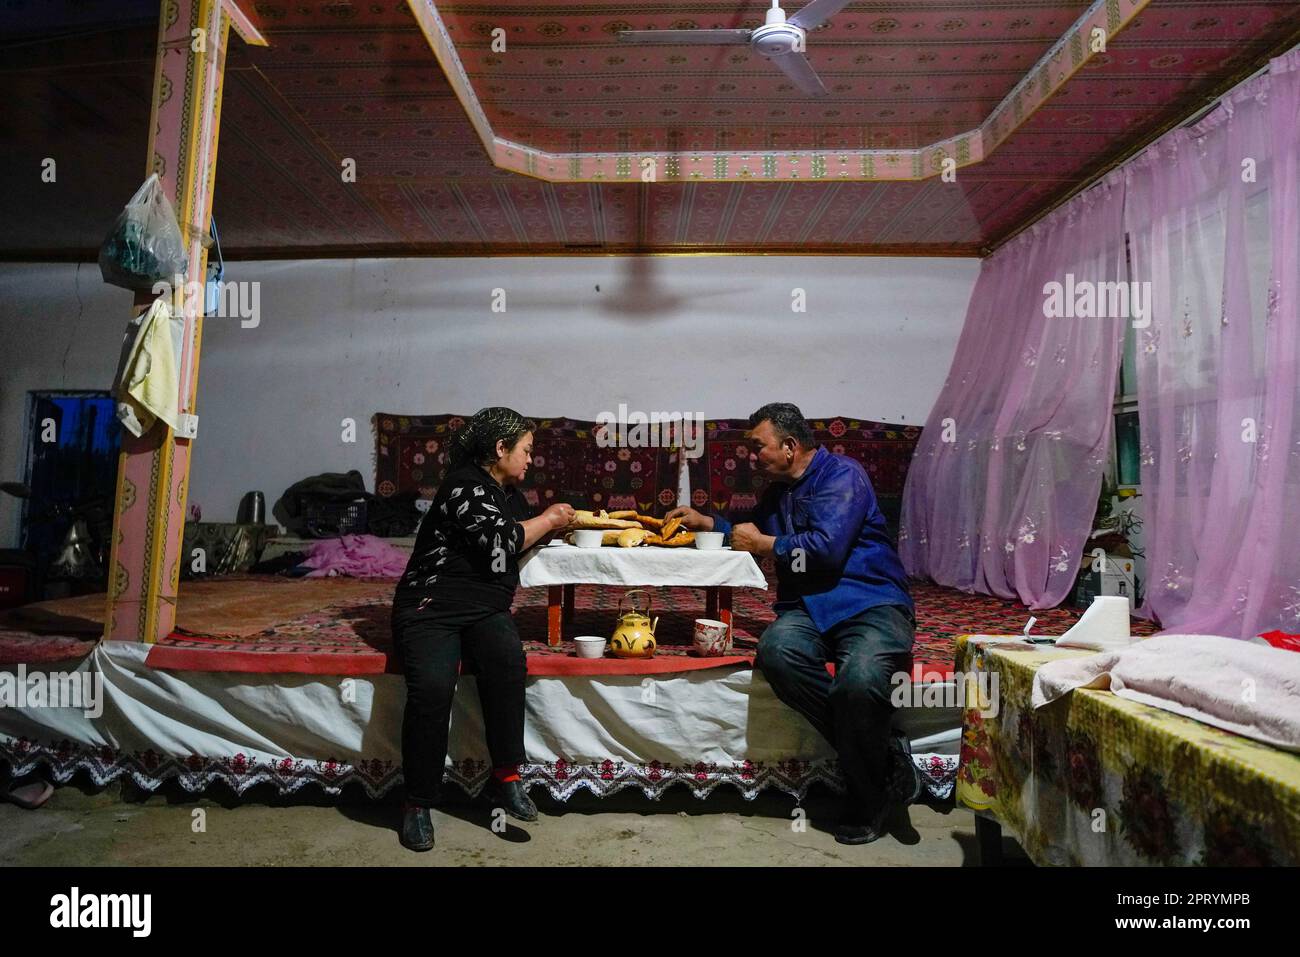 (230427) -- YULI, April 27, 2023 (Xinhua) -- Arkin Reyim has dinner with his wife in the Bax Mali Village of Yuli County, northwest China's Xinjiang Uygur Autonomous Region, April 21, 2023.  Arkin Reyim is a 51-year-old cotton farmer with more than 300 mu (20 hectares) of cotton fields in the Bax Mali Village of Yuli County in Xinjiang.     Arkin's courage and unique vision has prompted him to start growing cotton in 2004 when he got married with his wife Hasiyat Kasim. Since then, Arkin has devoted himself into the cultivation of cotton for over 10 years, thus making him an experienced cotton Stock Photo